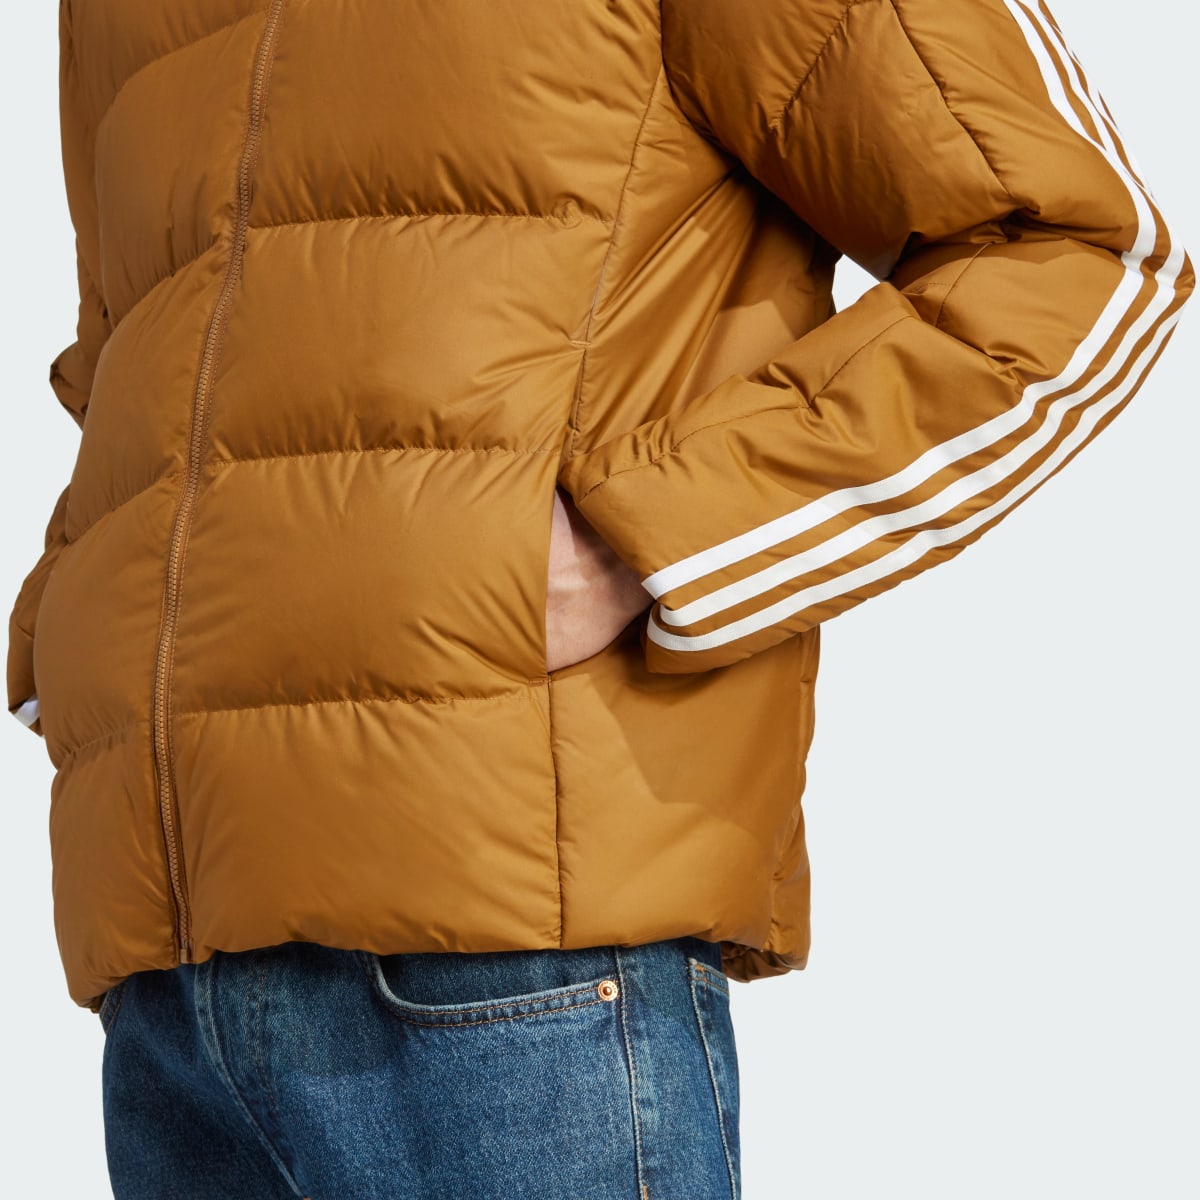 Adidas Essentials Midweight Down Hooded Jacket. 8